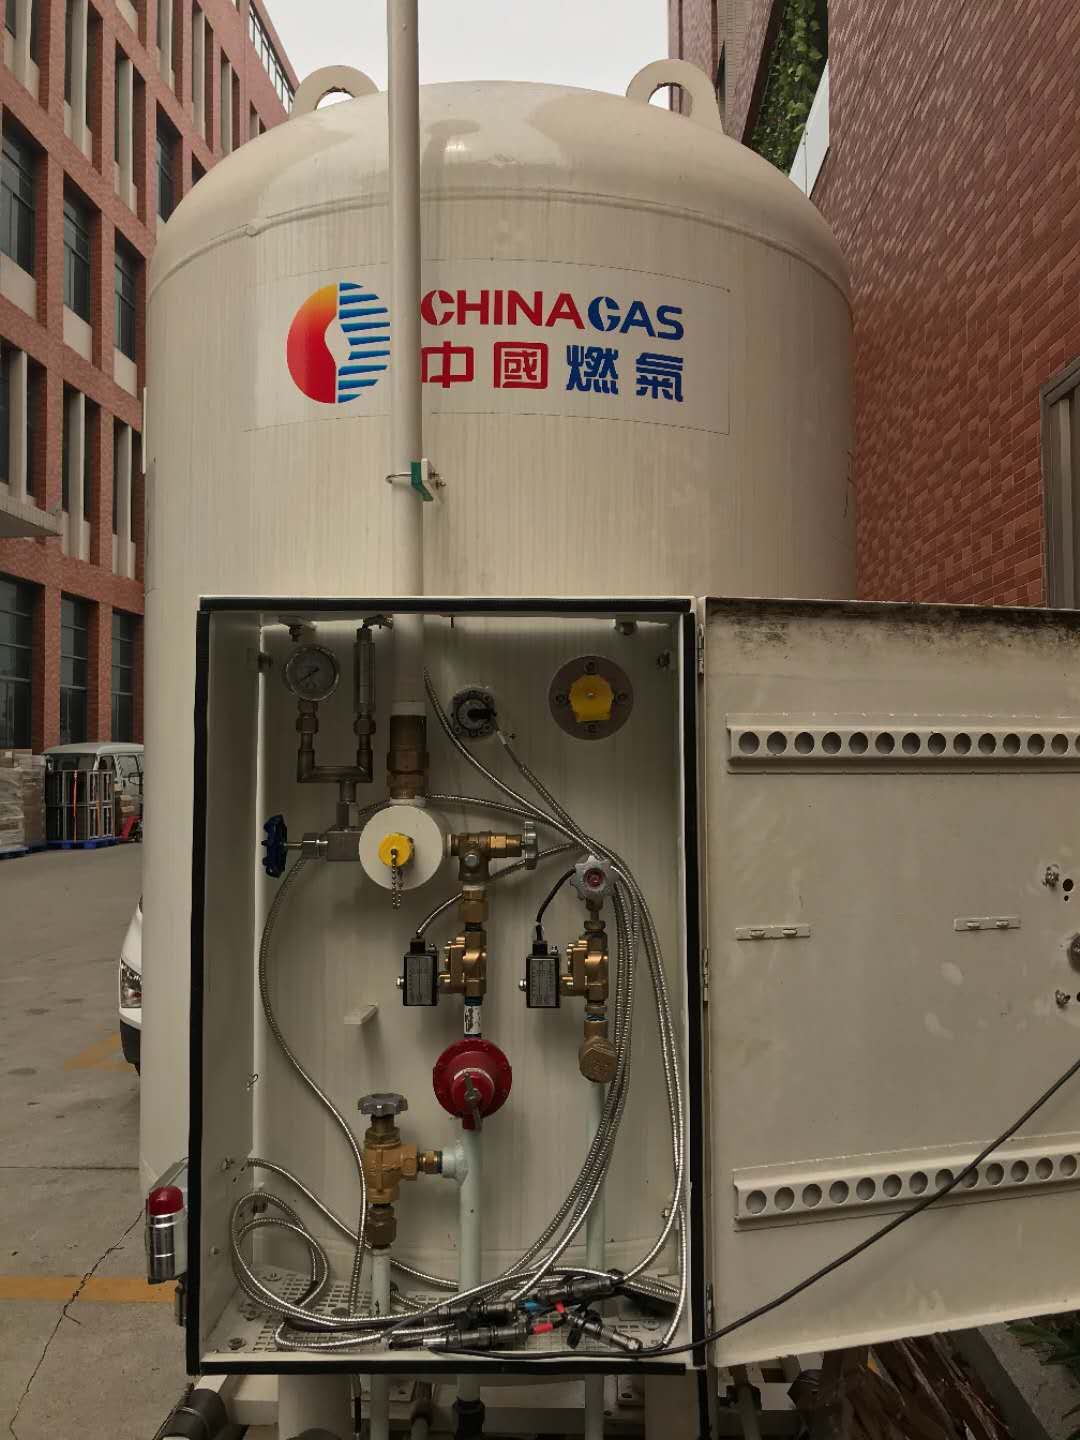 RegO and Rochester products are used in the storage tanks for China Gas piping supply network project